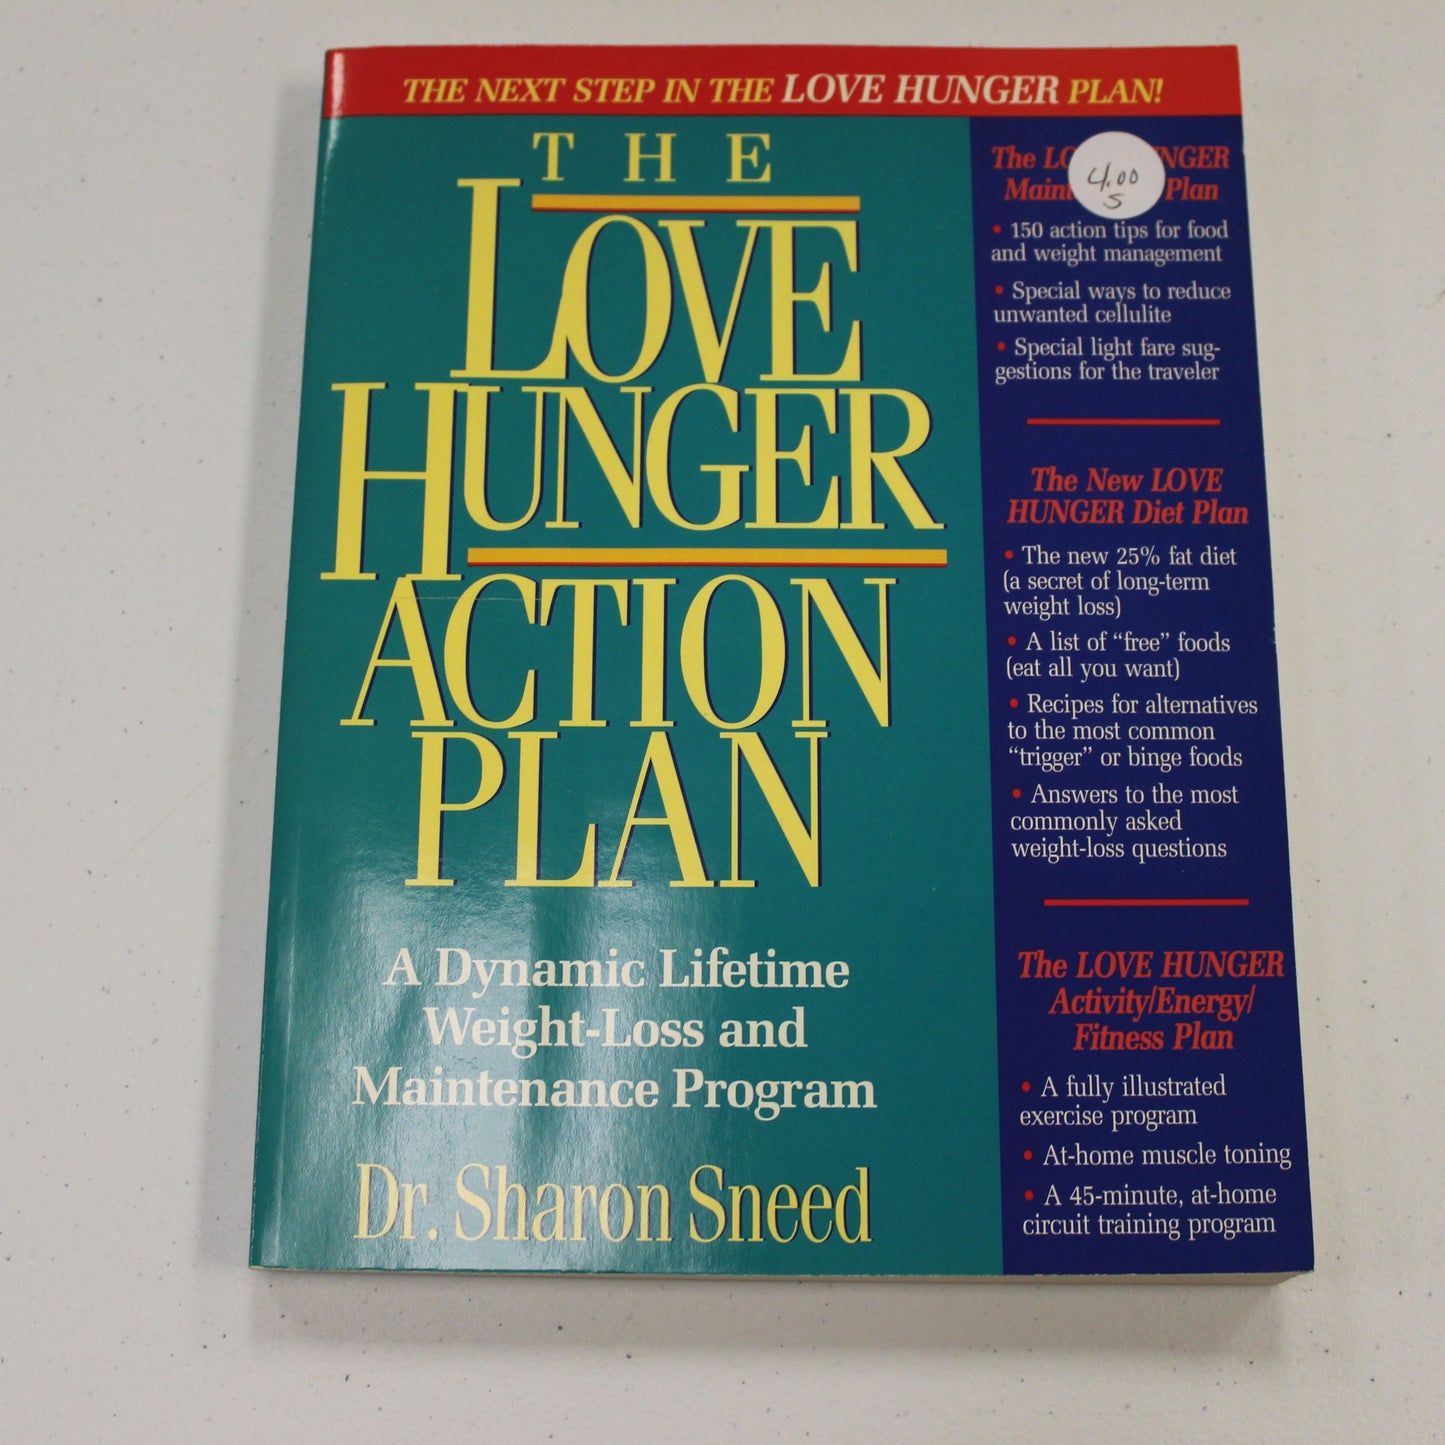 THE LOVE HUNGER ACTION PLAN